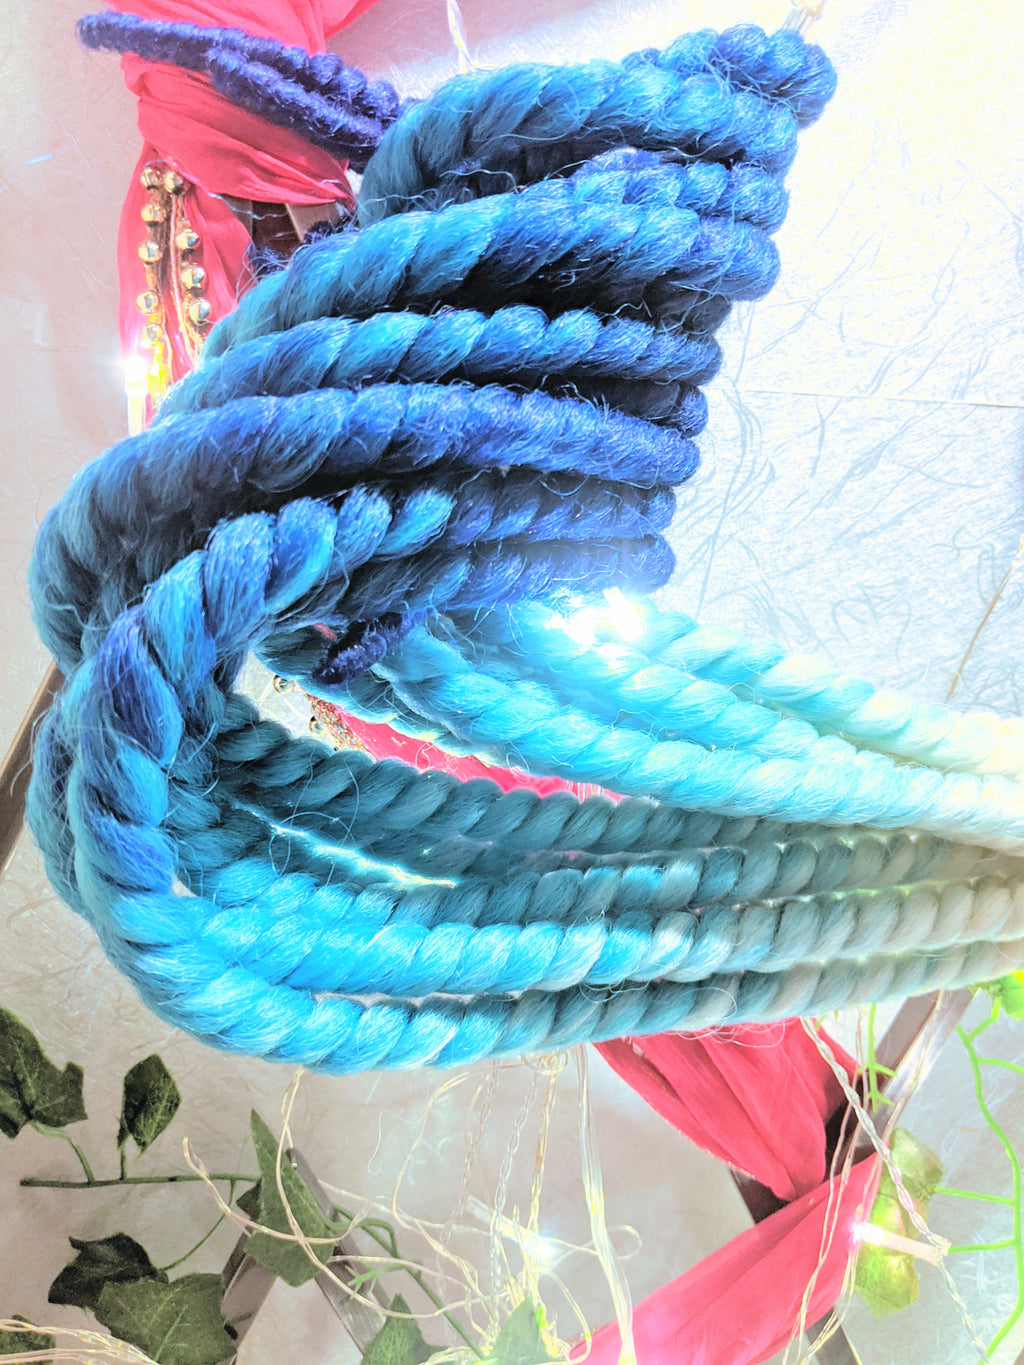 MILKY BLONDE BLUES OMBRE MEDIUM ROPETWISTS CROCHET BRAIDS 24 INCHES CATFACE HAIR.